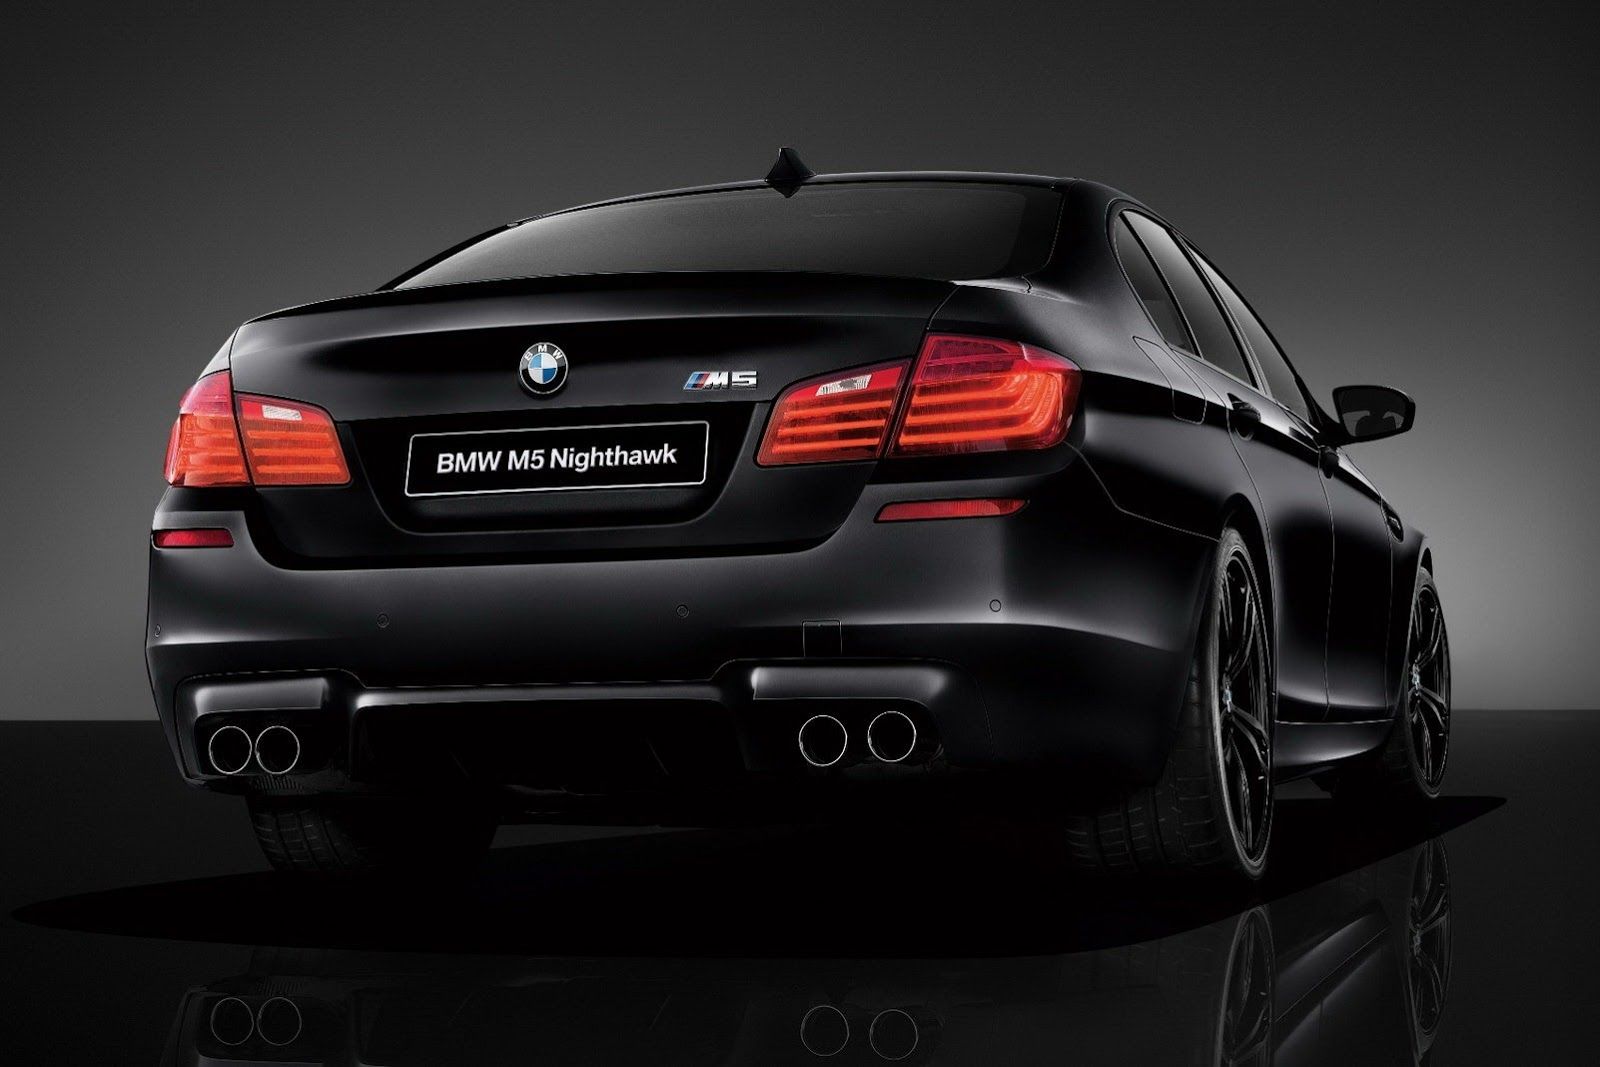 BMW M5 NGHTHAWK SPECAL EDTON RESM GALERS